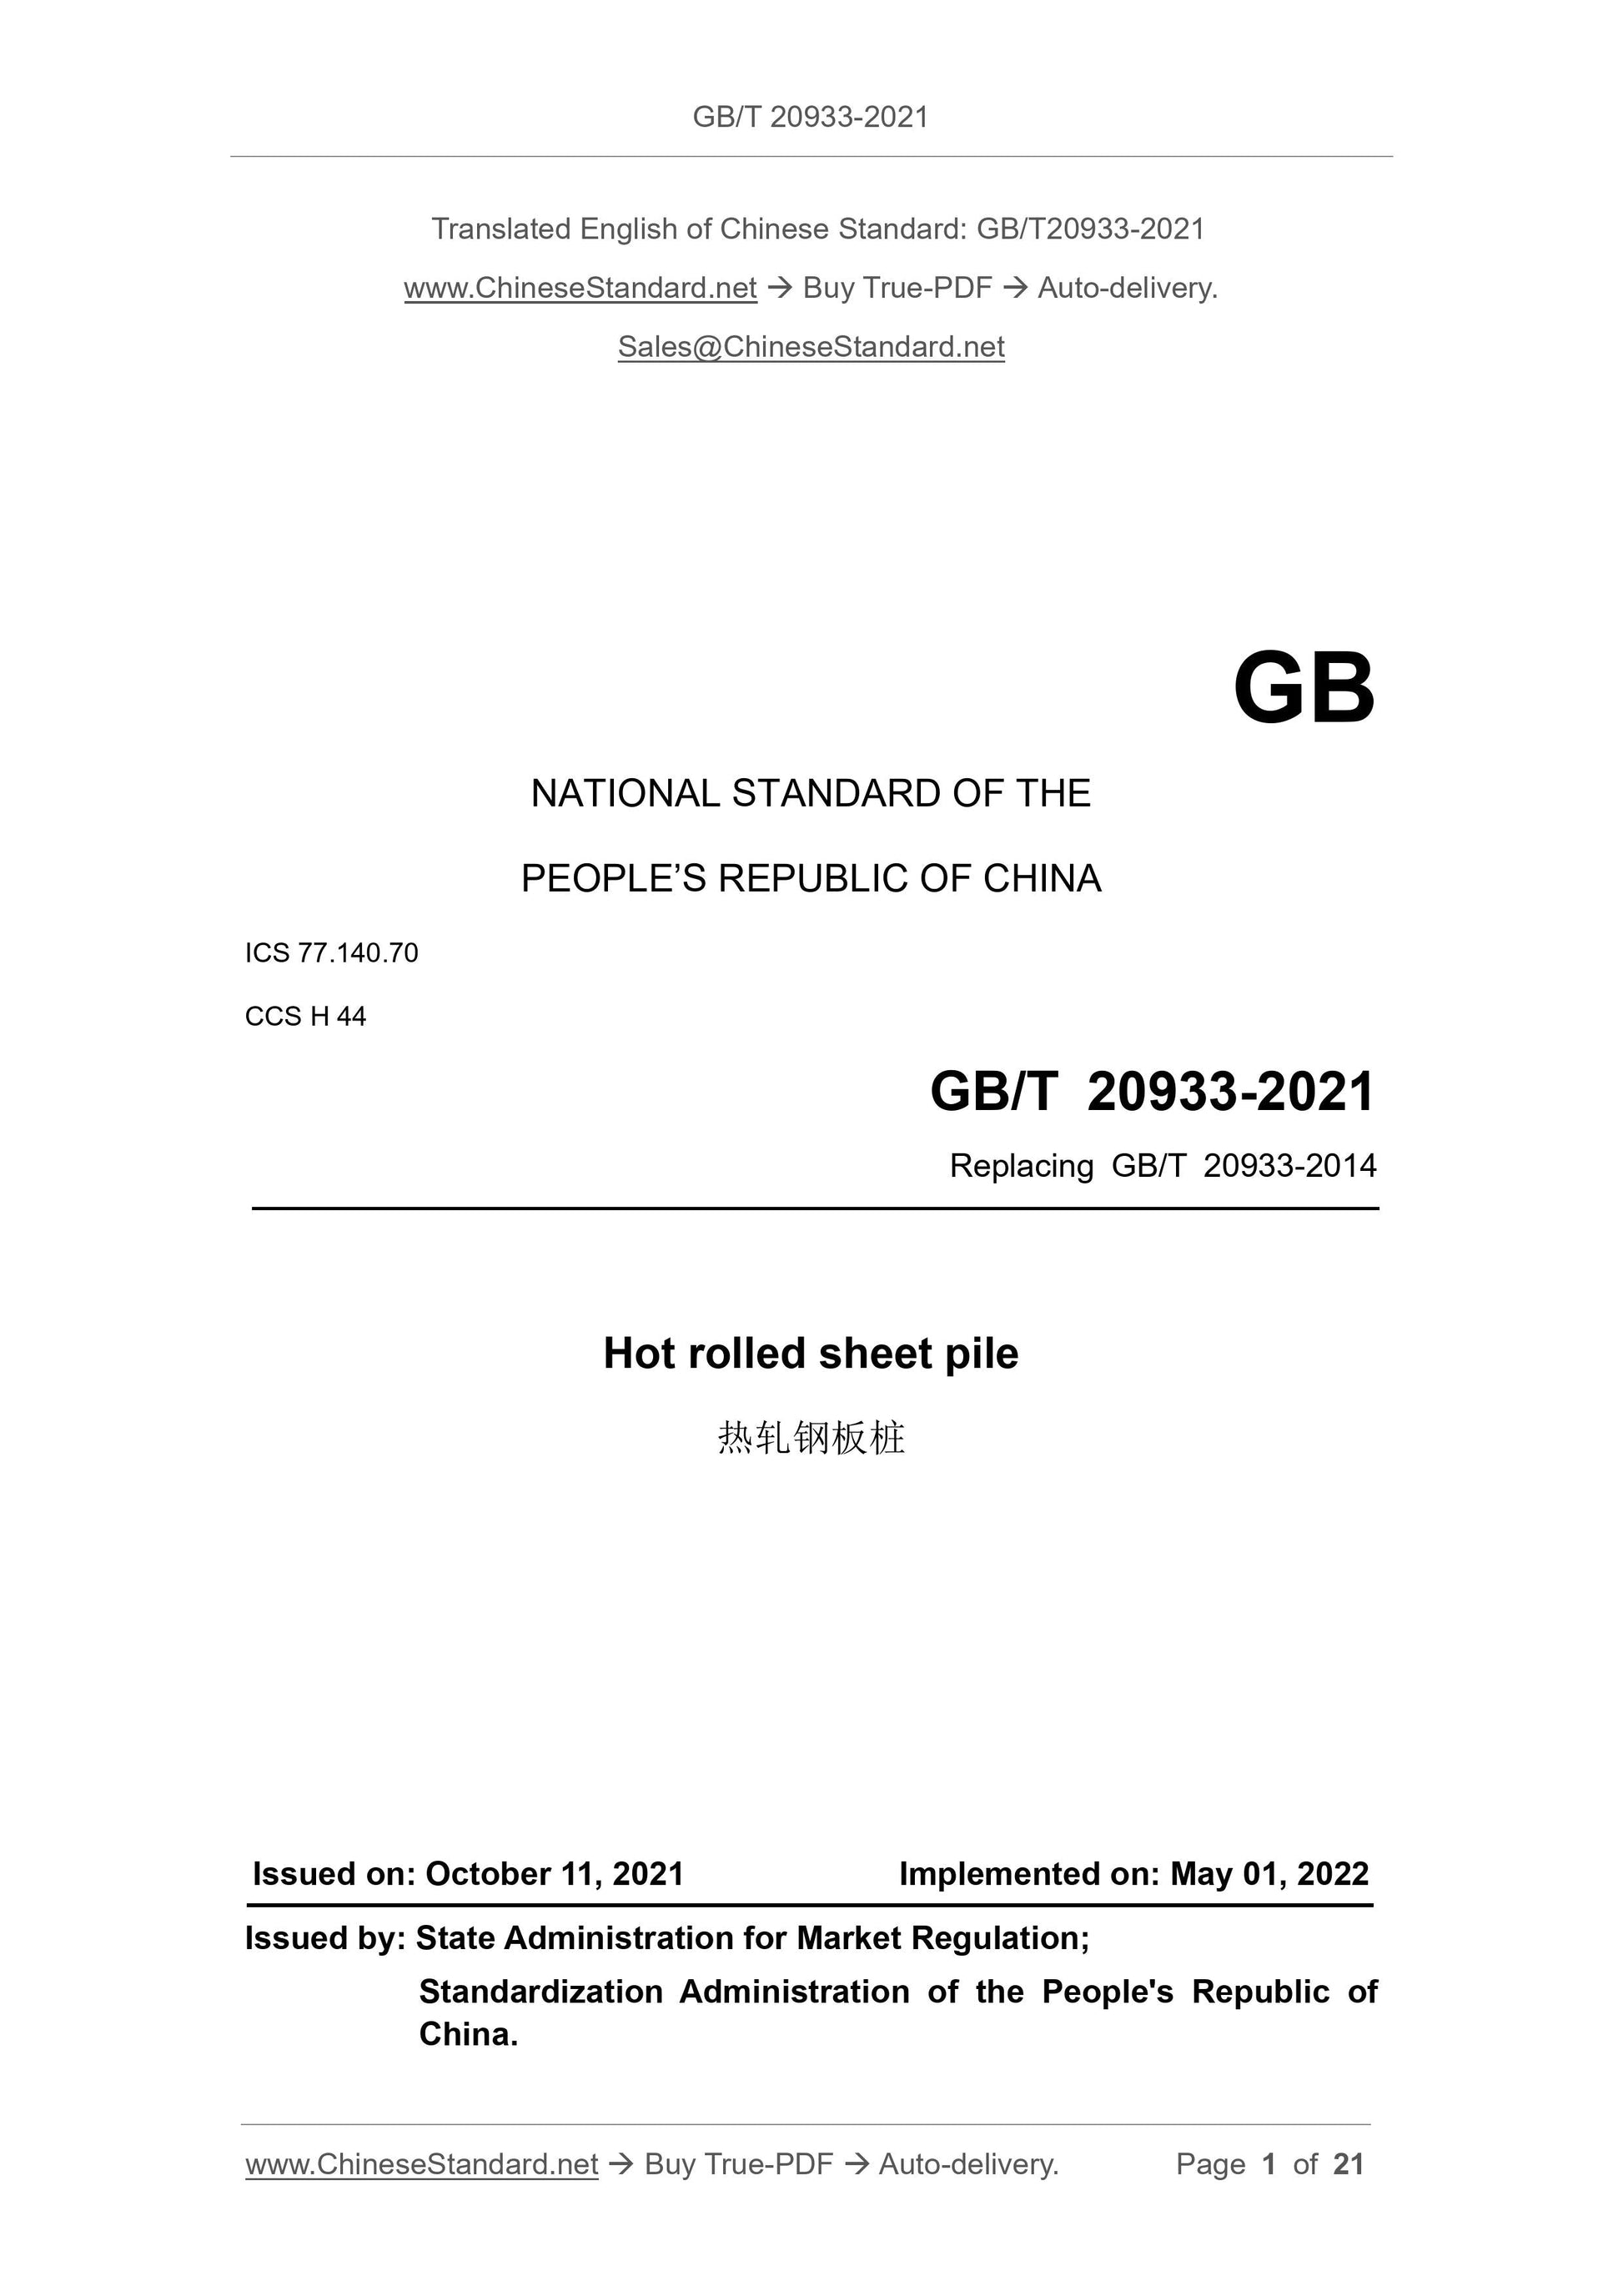 GB/T 20933-2021 Page 1